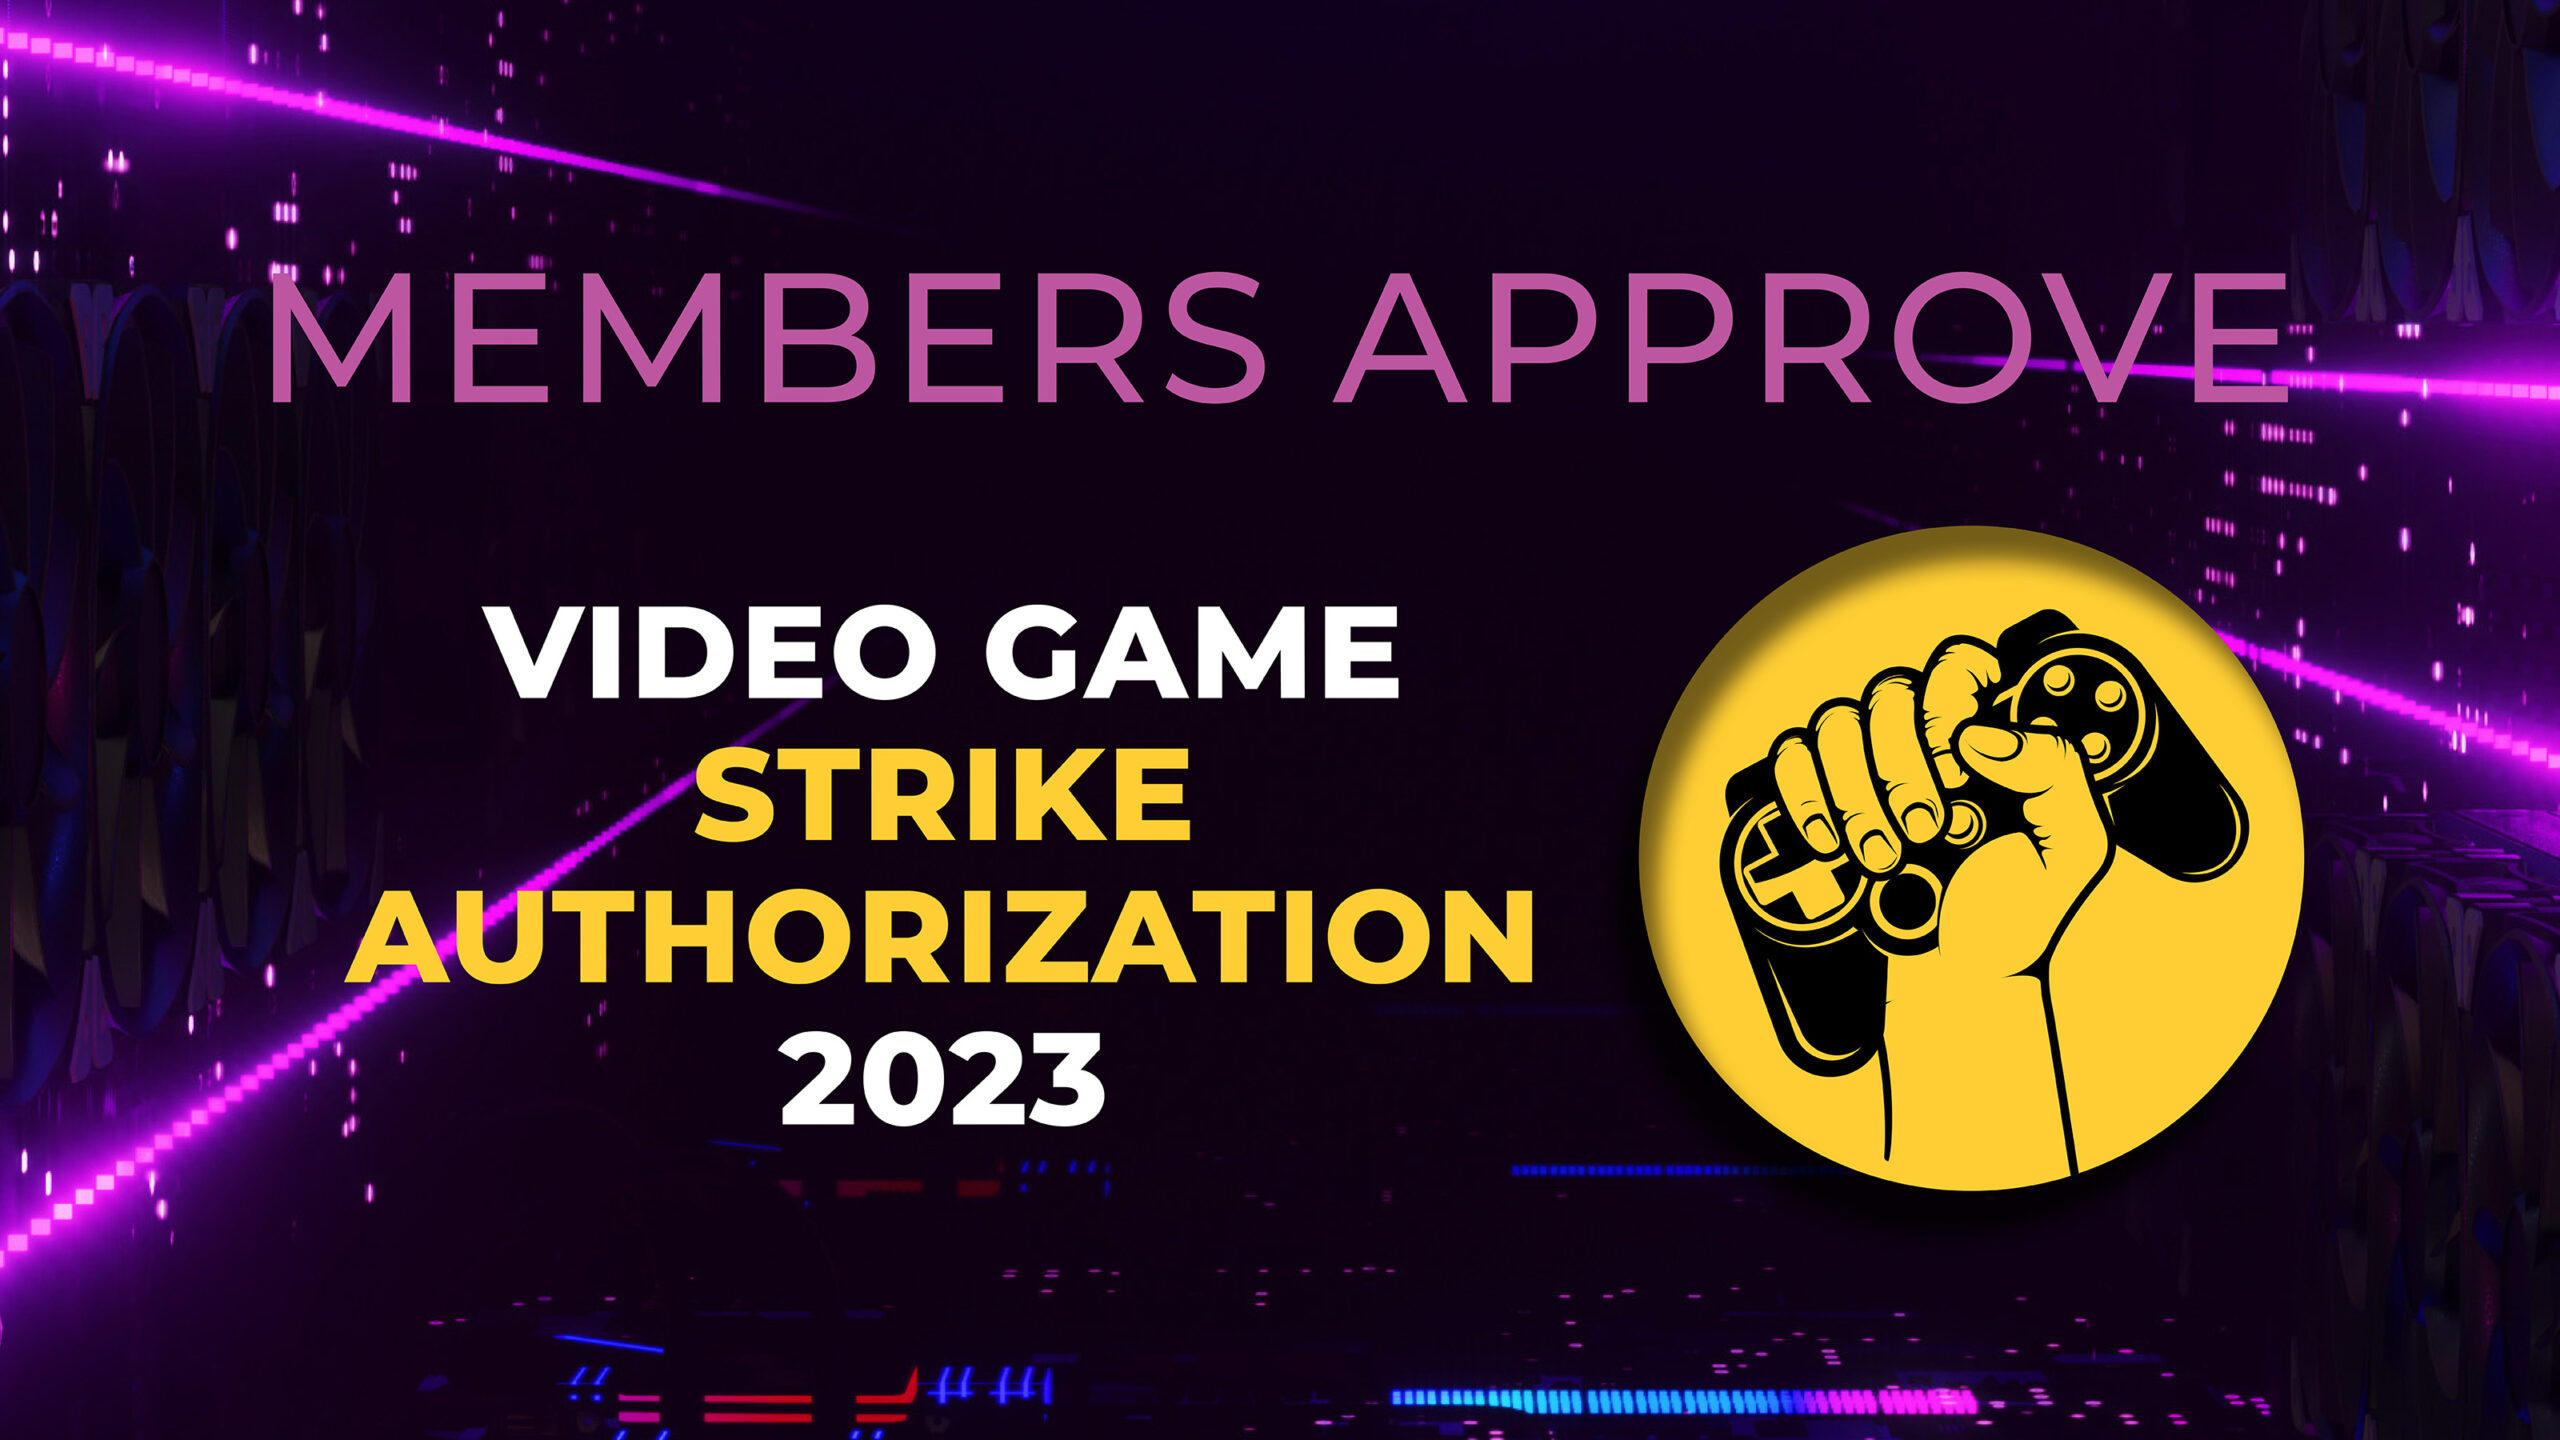 SAG-AFTRA Support Strike Authorization In Video Game Industry